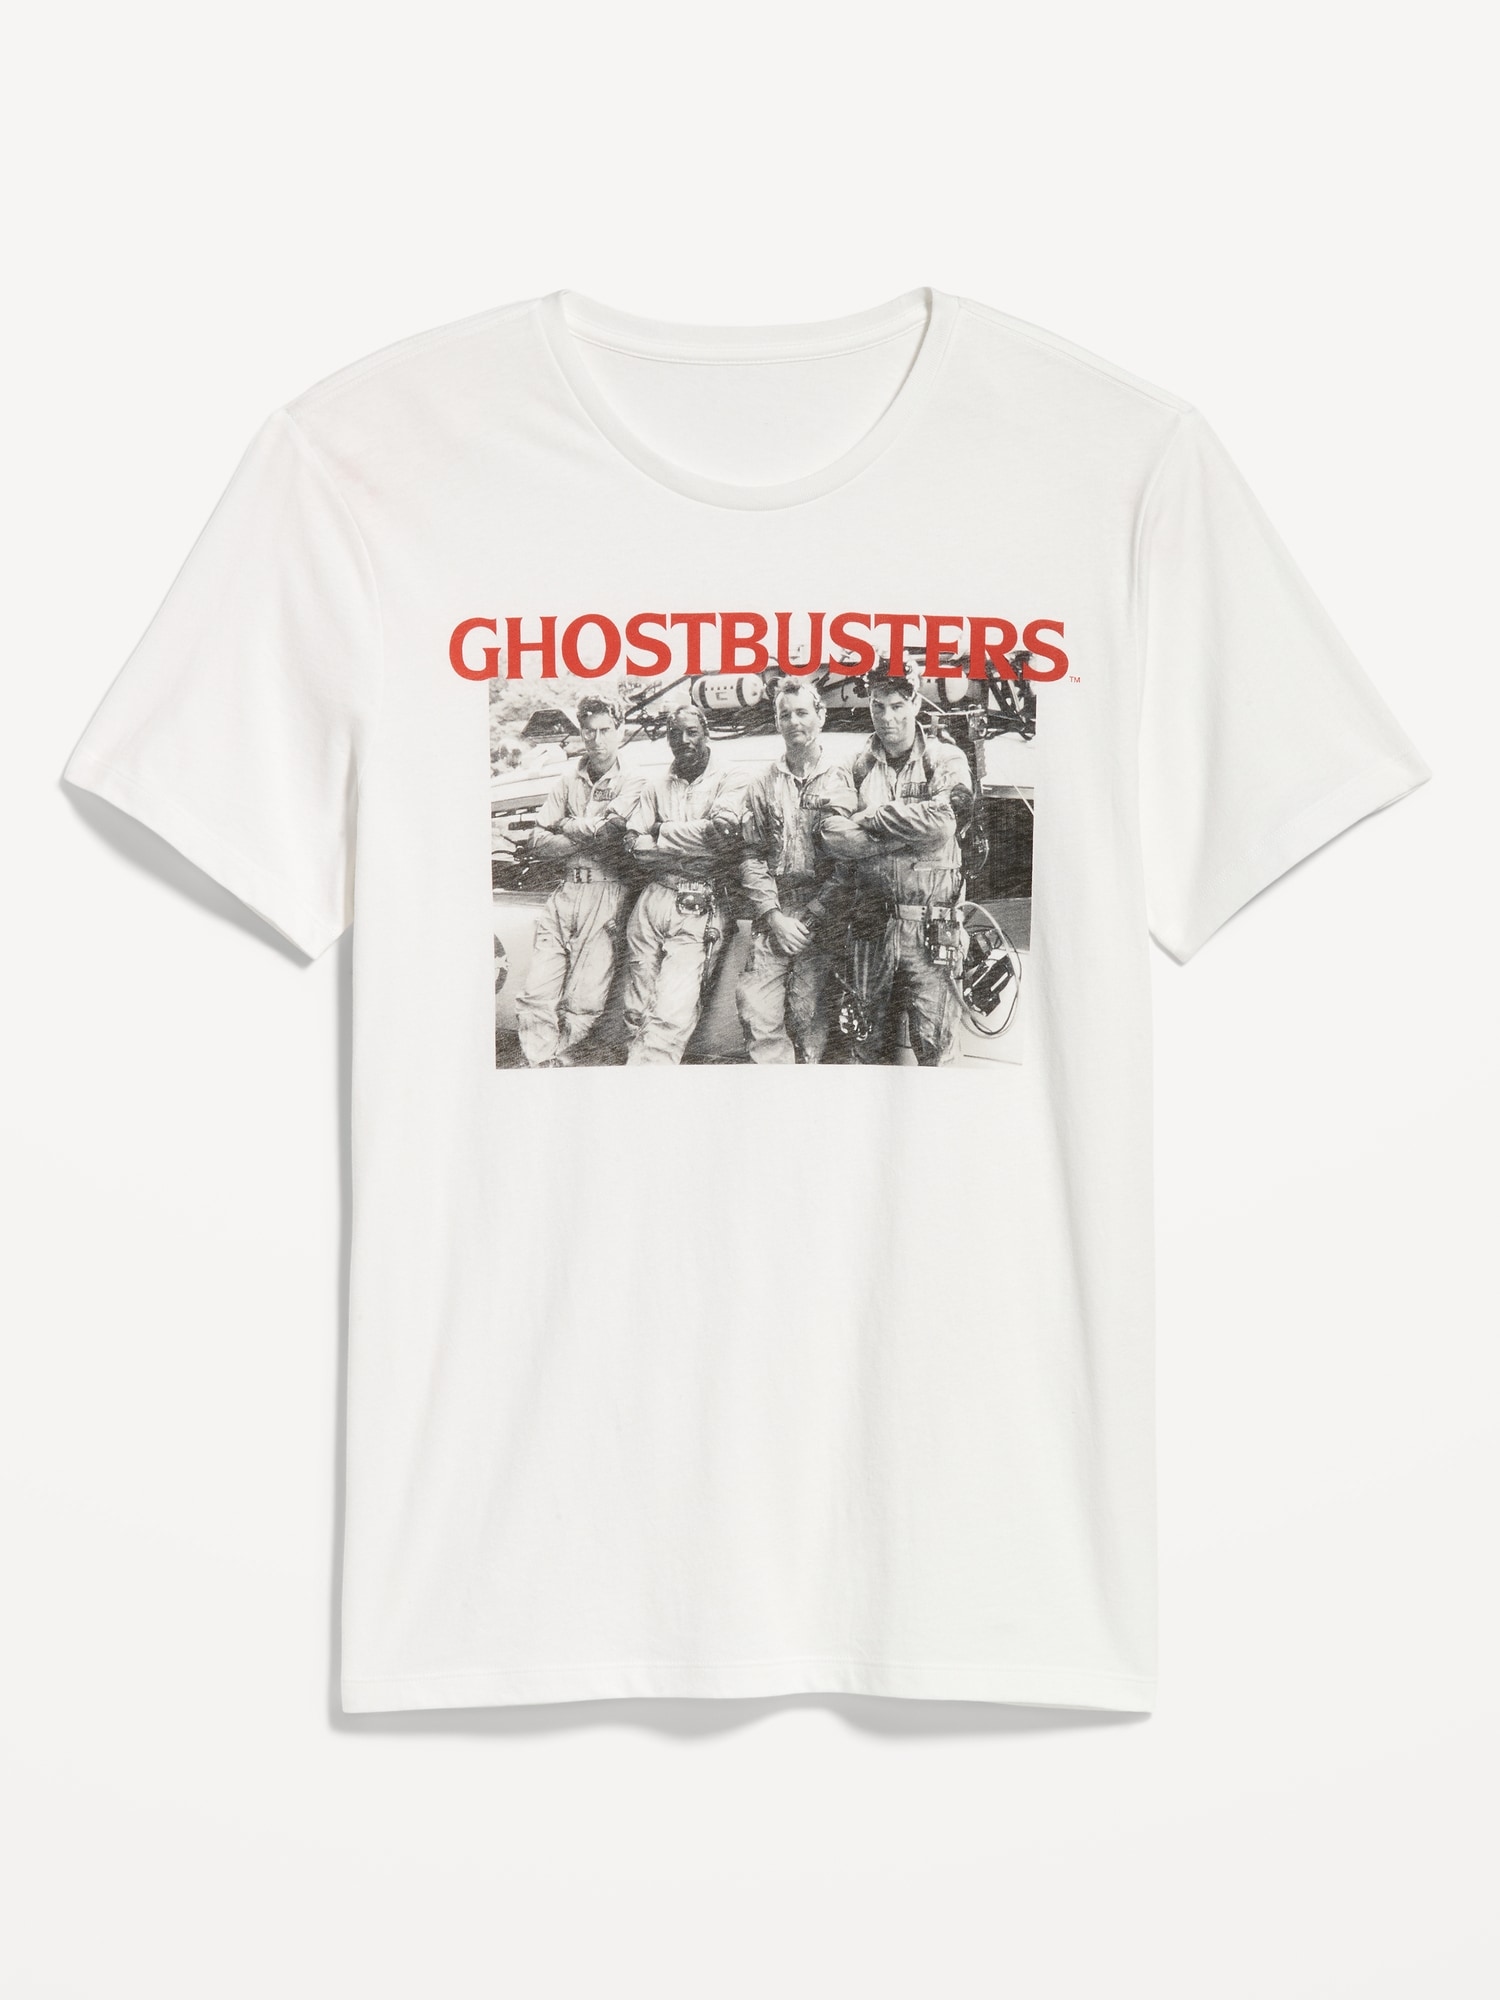 Ghostbusters™ Gender-Neutral T-Shirt for Adults